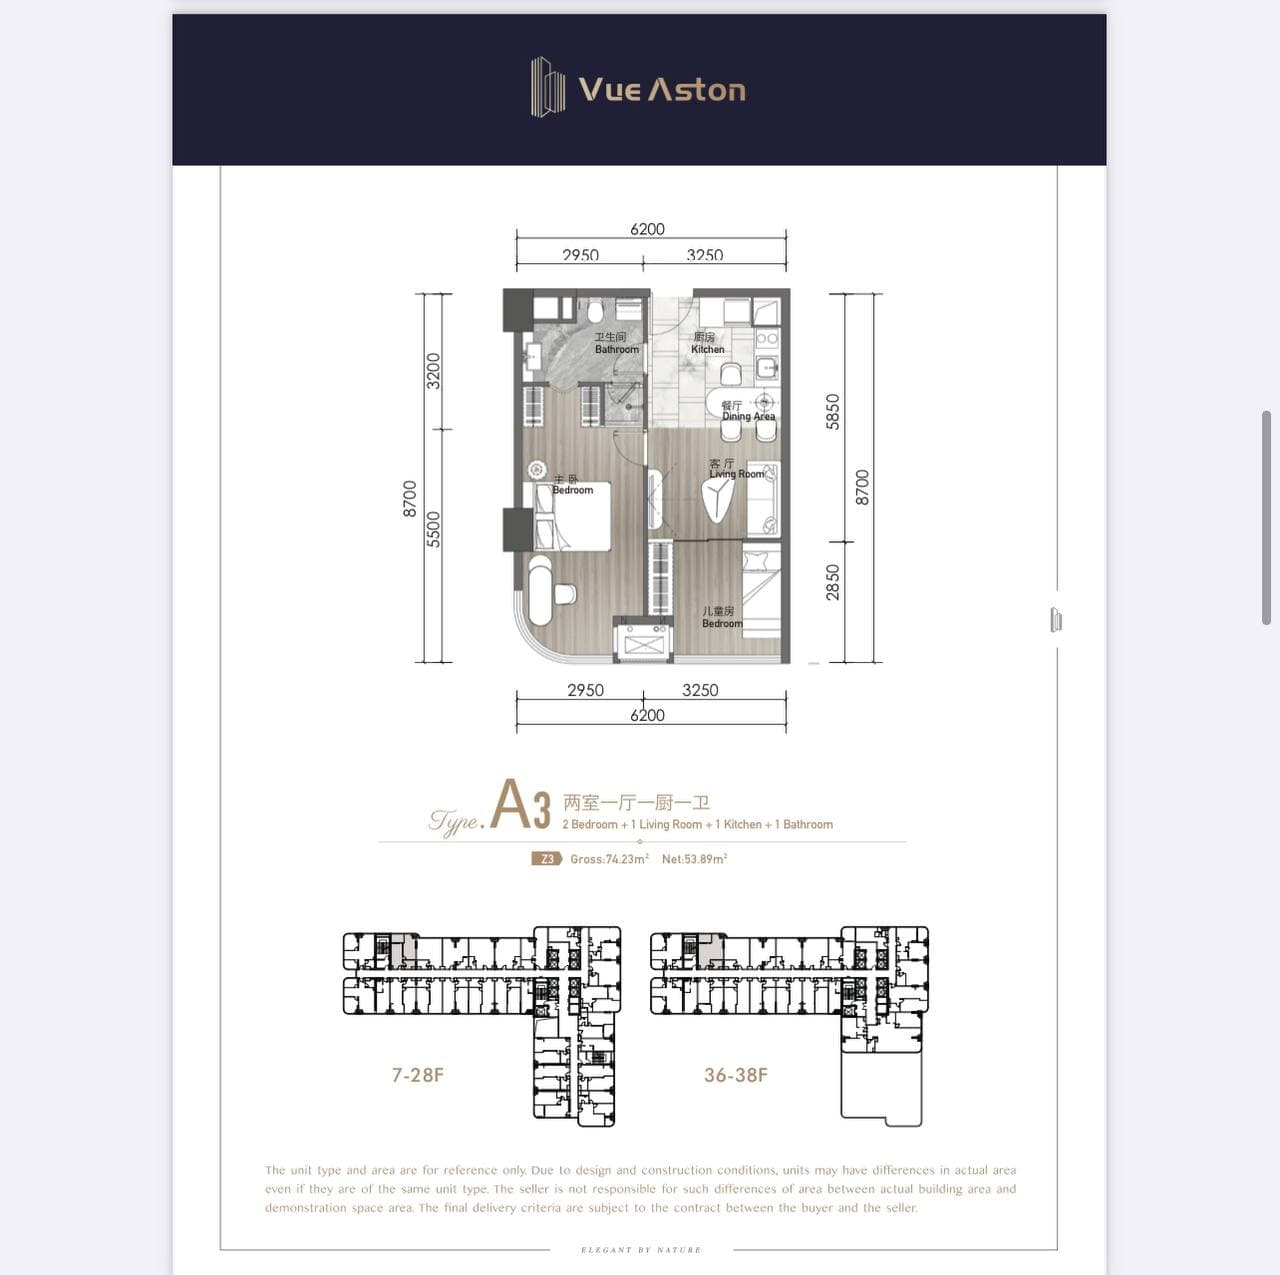 Vue Aston 2 bedroom layout A A3 Type